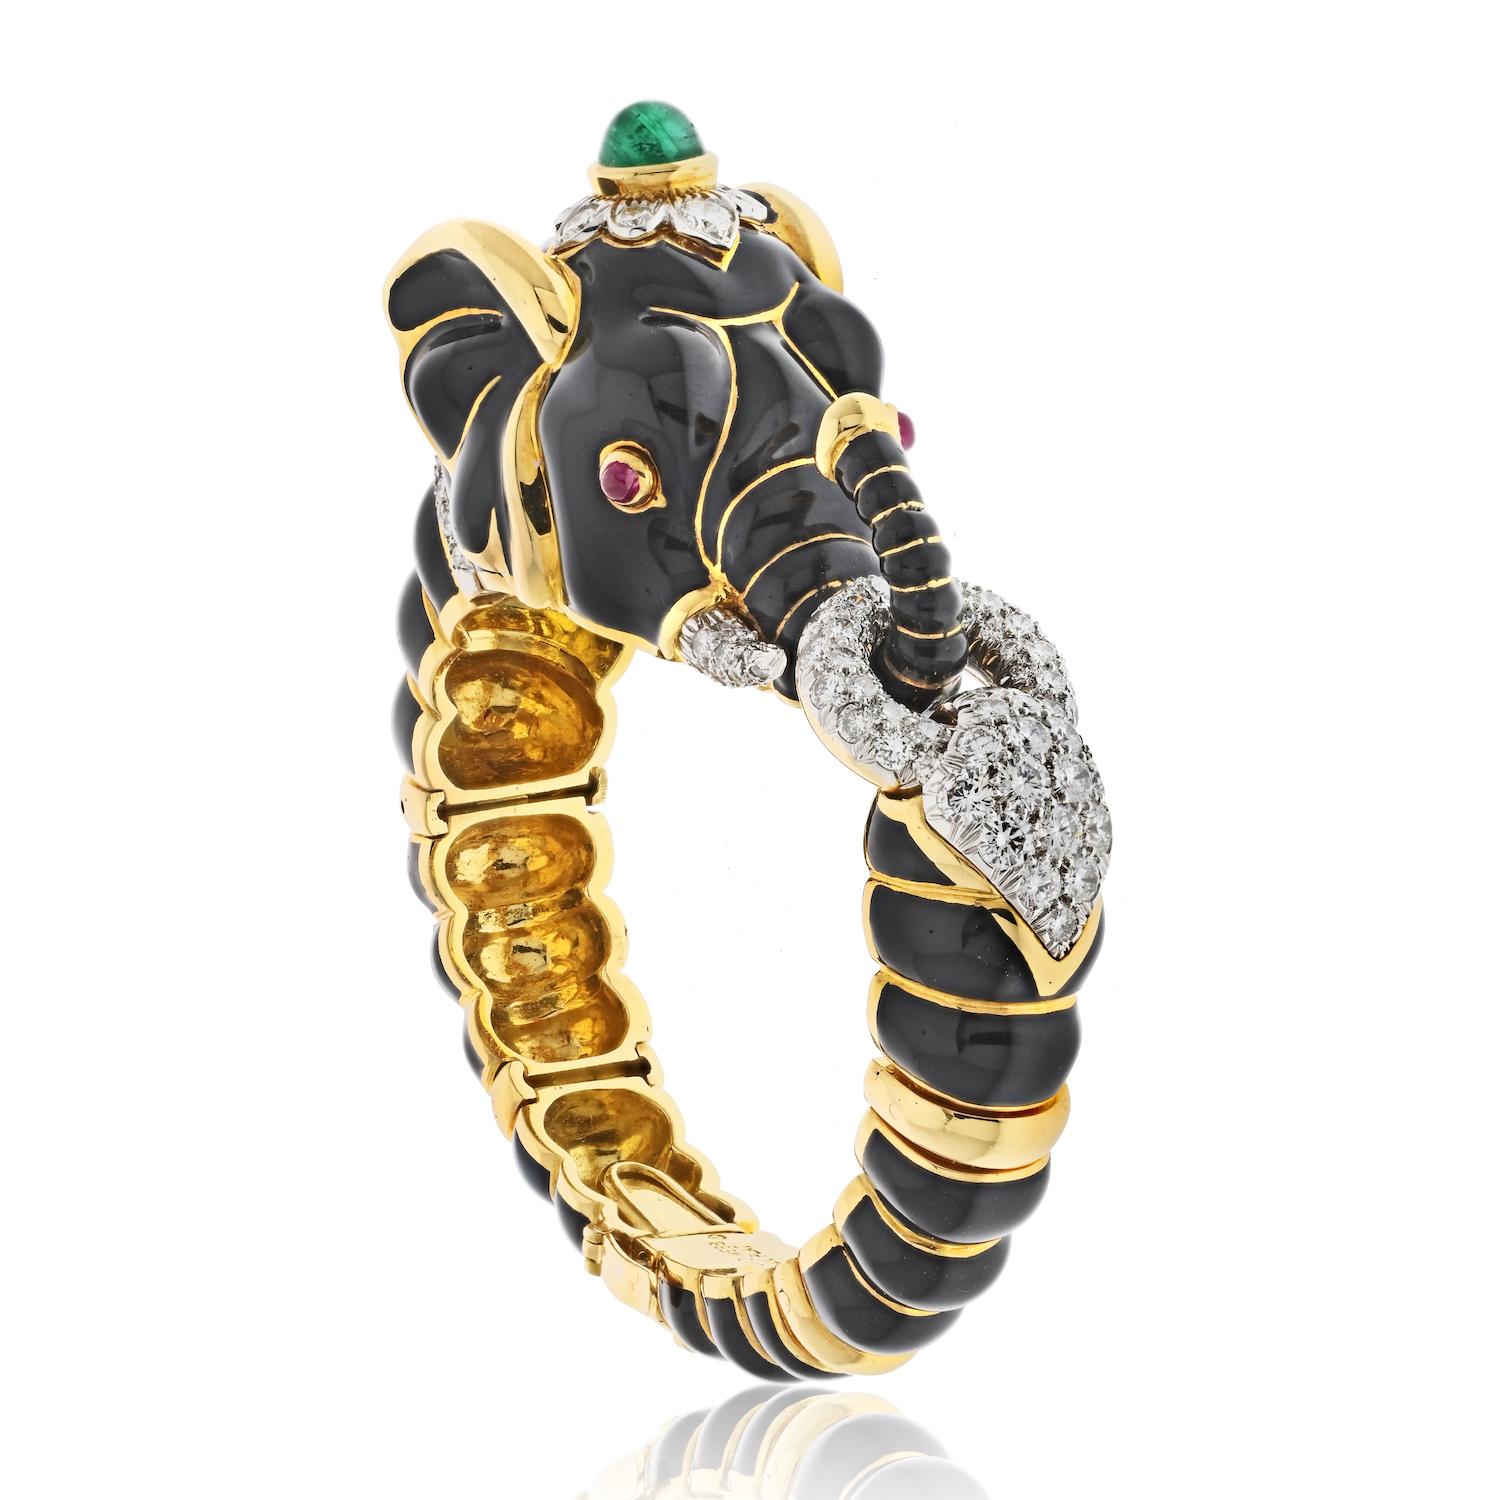 The David Webb 18k yellow gold black enamel diamond, ruby, and green emerald elephant bracelet from the Kingdom Collection is a truly exceptional piece of jewelry that exudes luxury and sophistication. The bracelet features a striking design with a